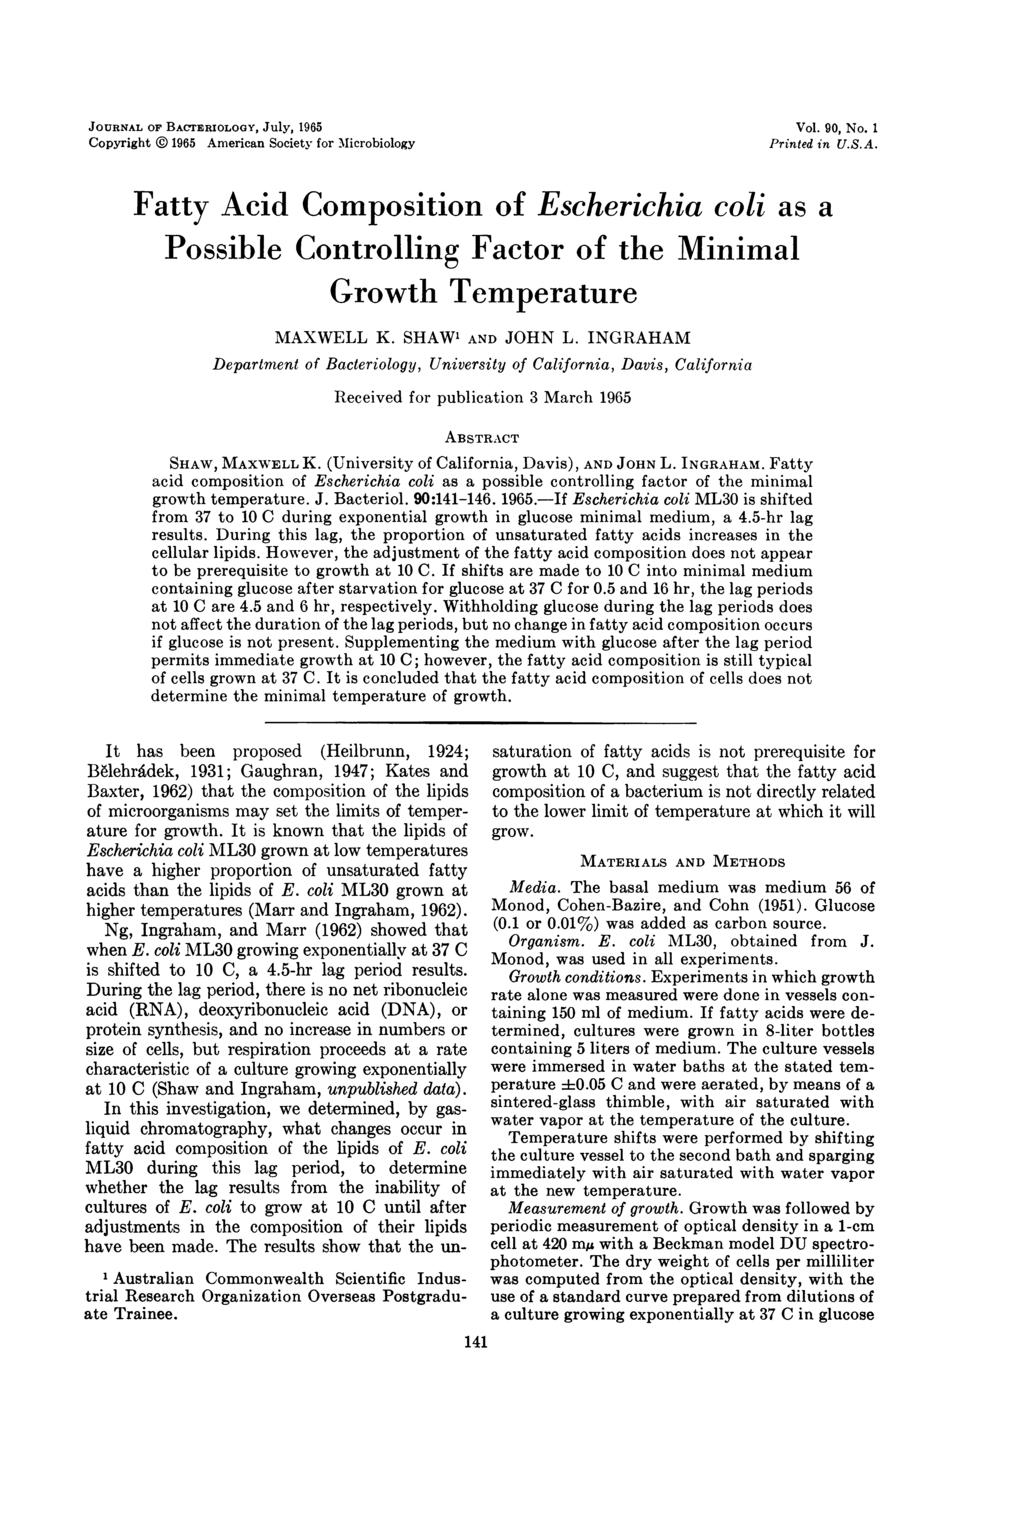 JOURNAL OF BACTERIOLOGY, JUly, 1965 Copyright @ 1965 American Society for MIicrobiology Vol. 9, No. 1 Printed in U.S.A. Fatty Acid Composition of Escherichia coli as a Possible Controlling Factor of the Minimal Growth Temperature MAXWELL K.